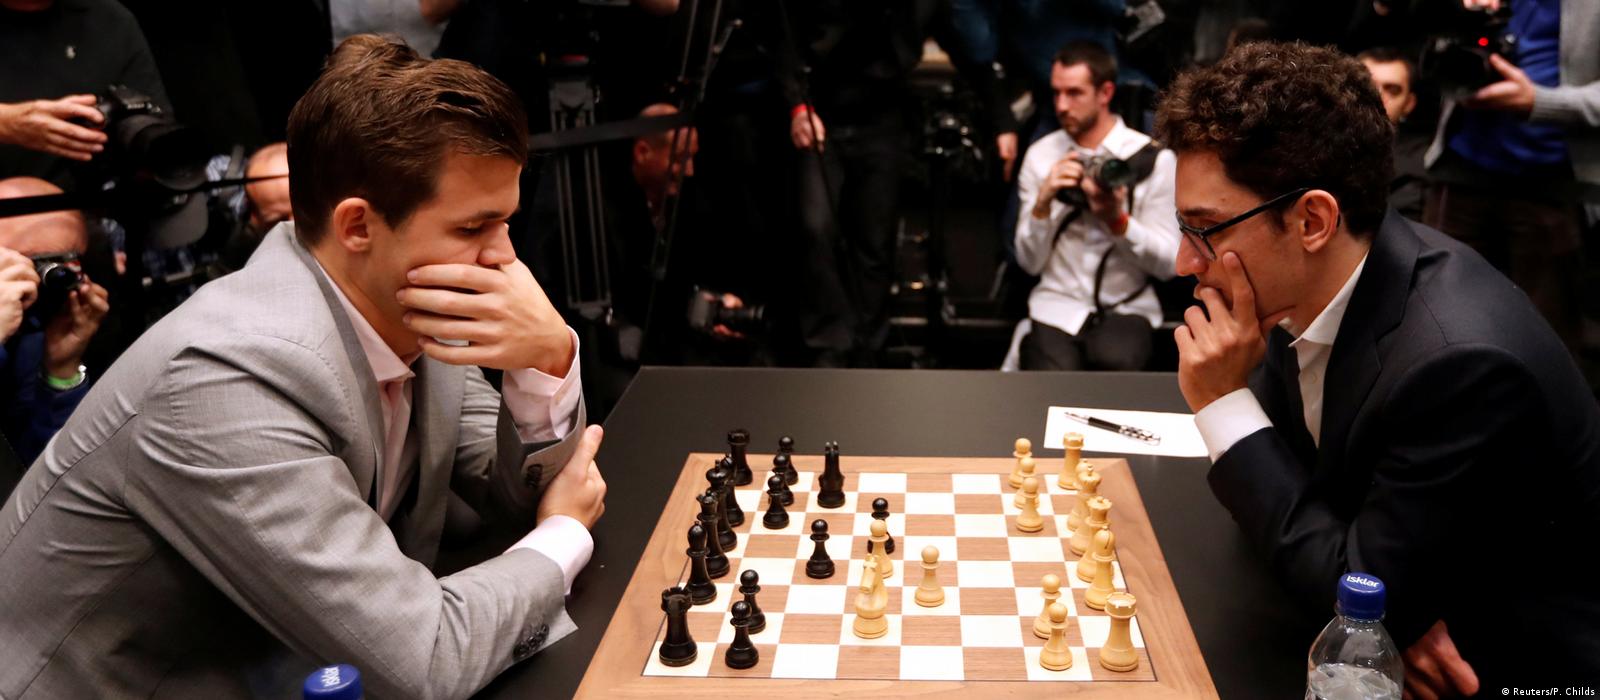 What is the most boring match for the World Chess Championship? - Quora